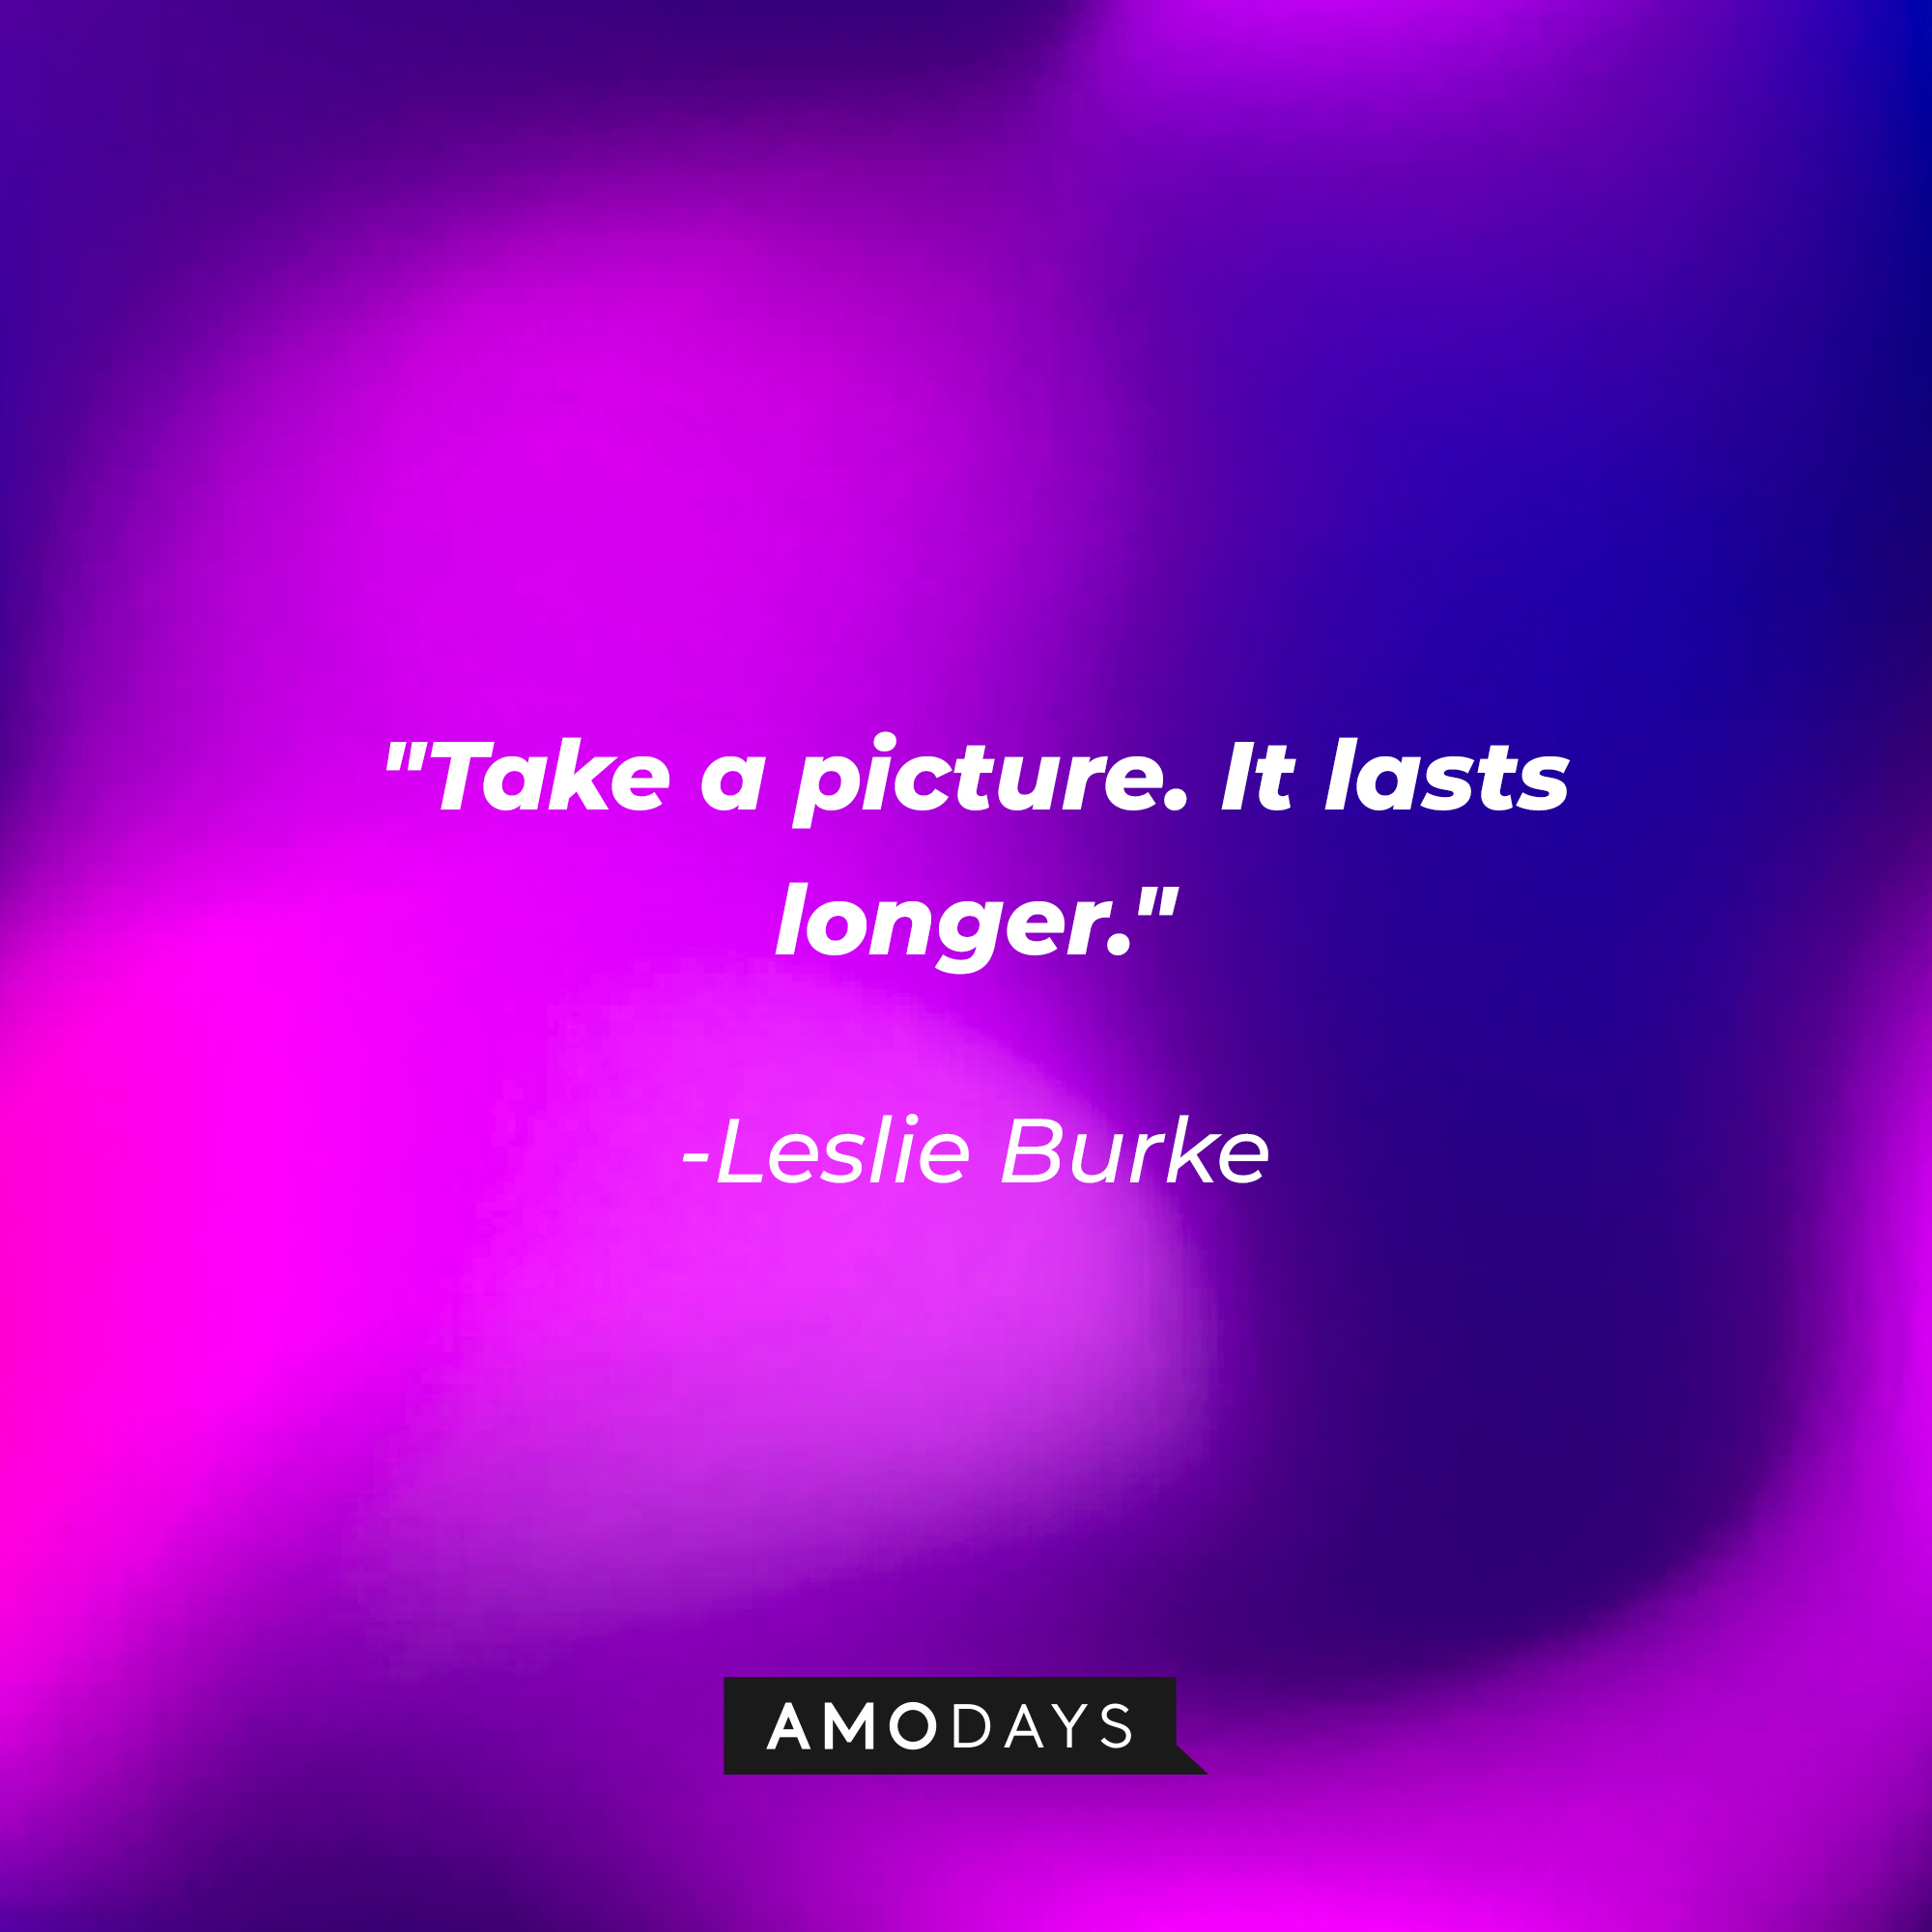 Leslie Burke's quote: " Take a picture. It lasts longer." | Source: Amodays